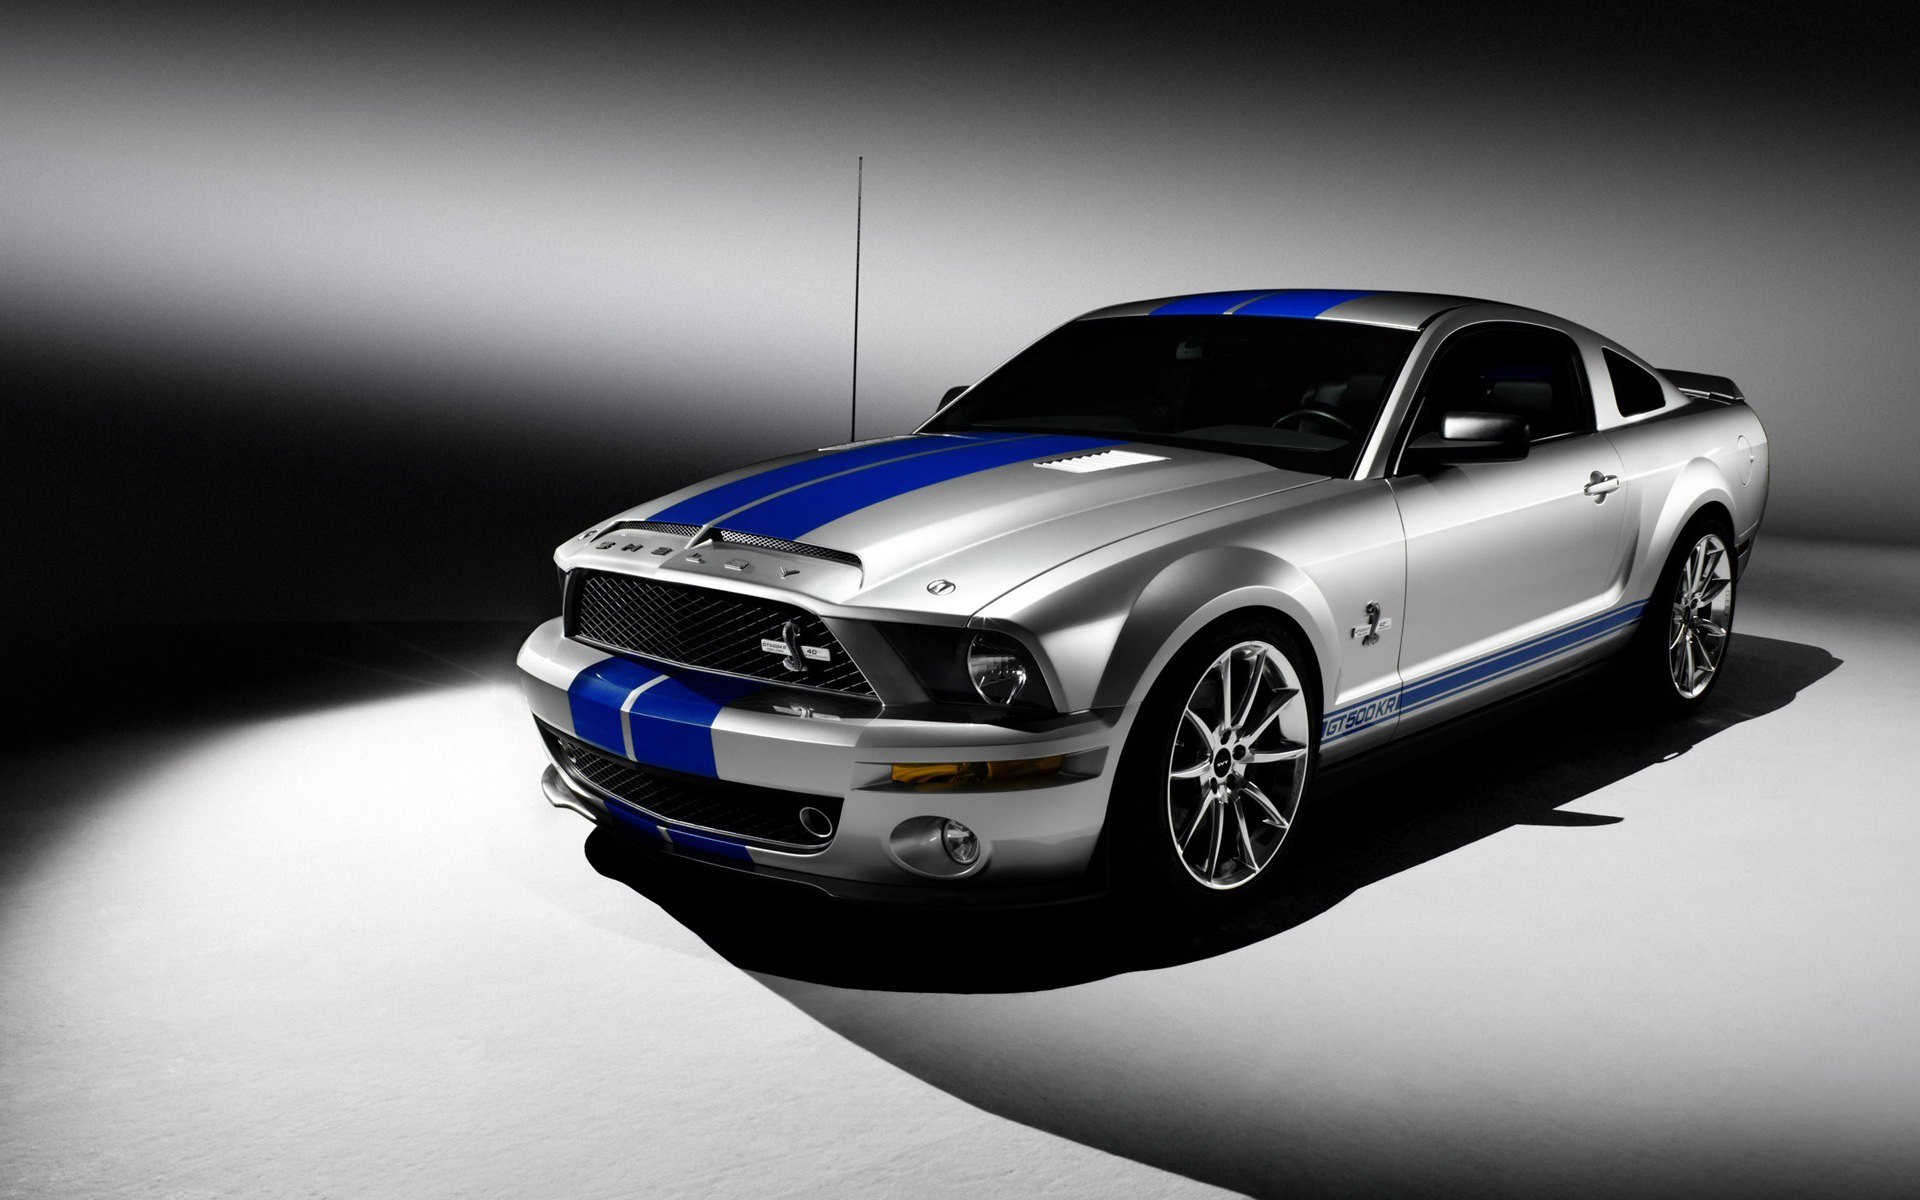 Ford Shelby Mustang GT500 HD Wallpaper 1920x1200